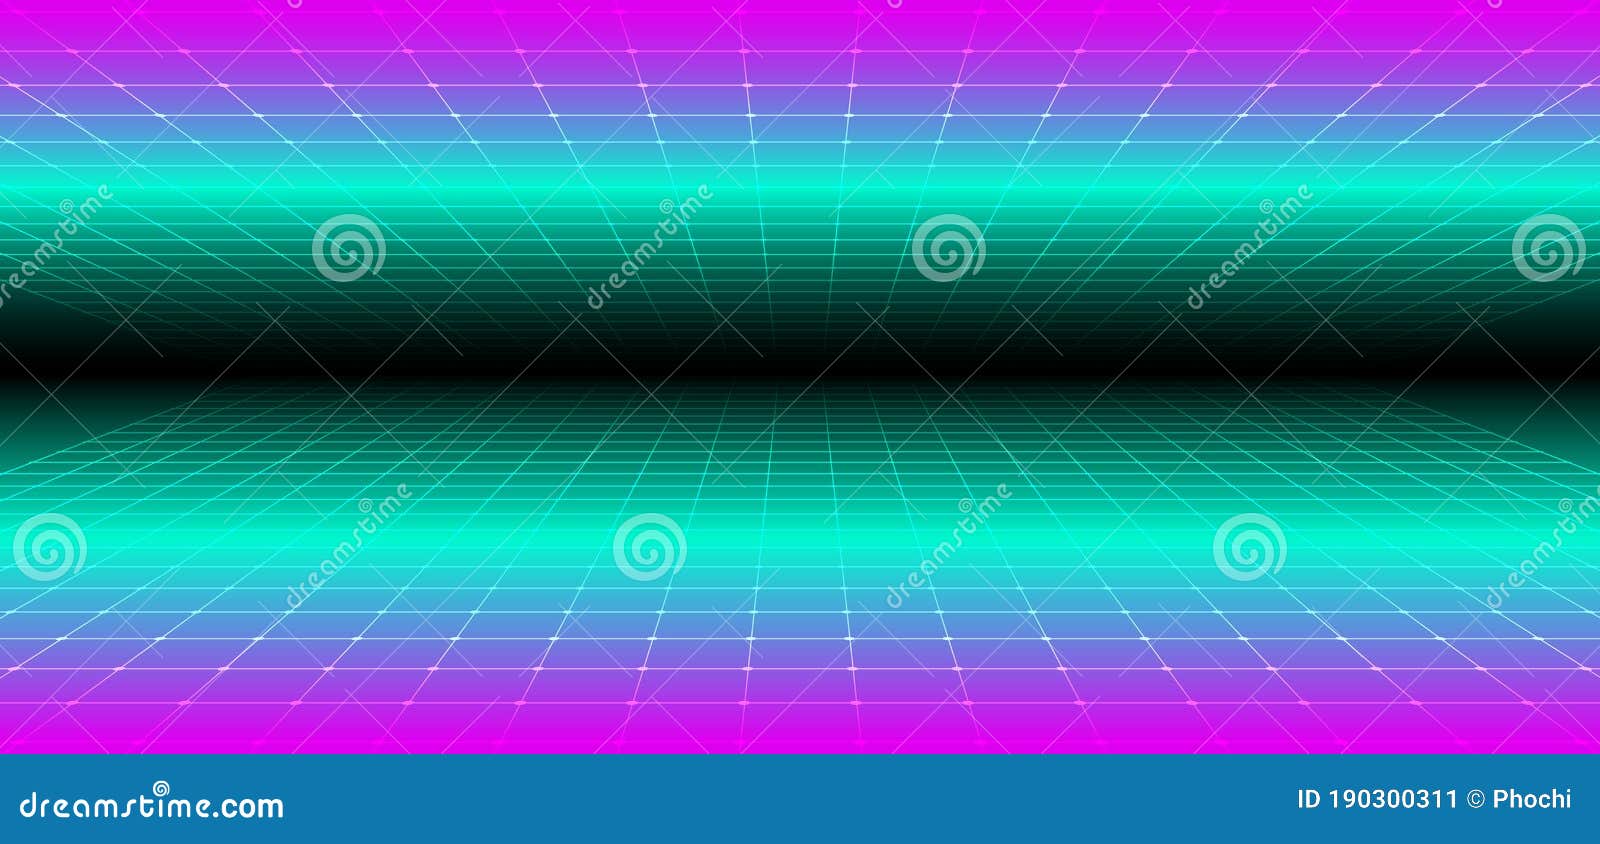 abstract 90s retro style technology futuristic concept grid perspective on black background